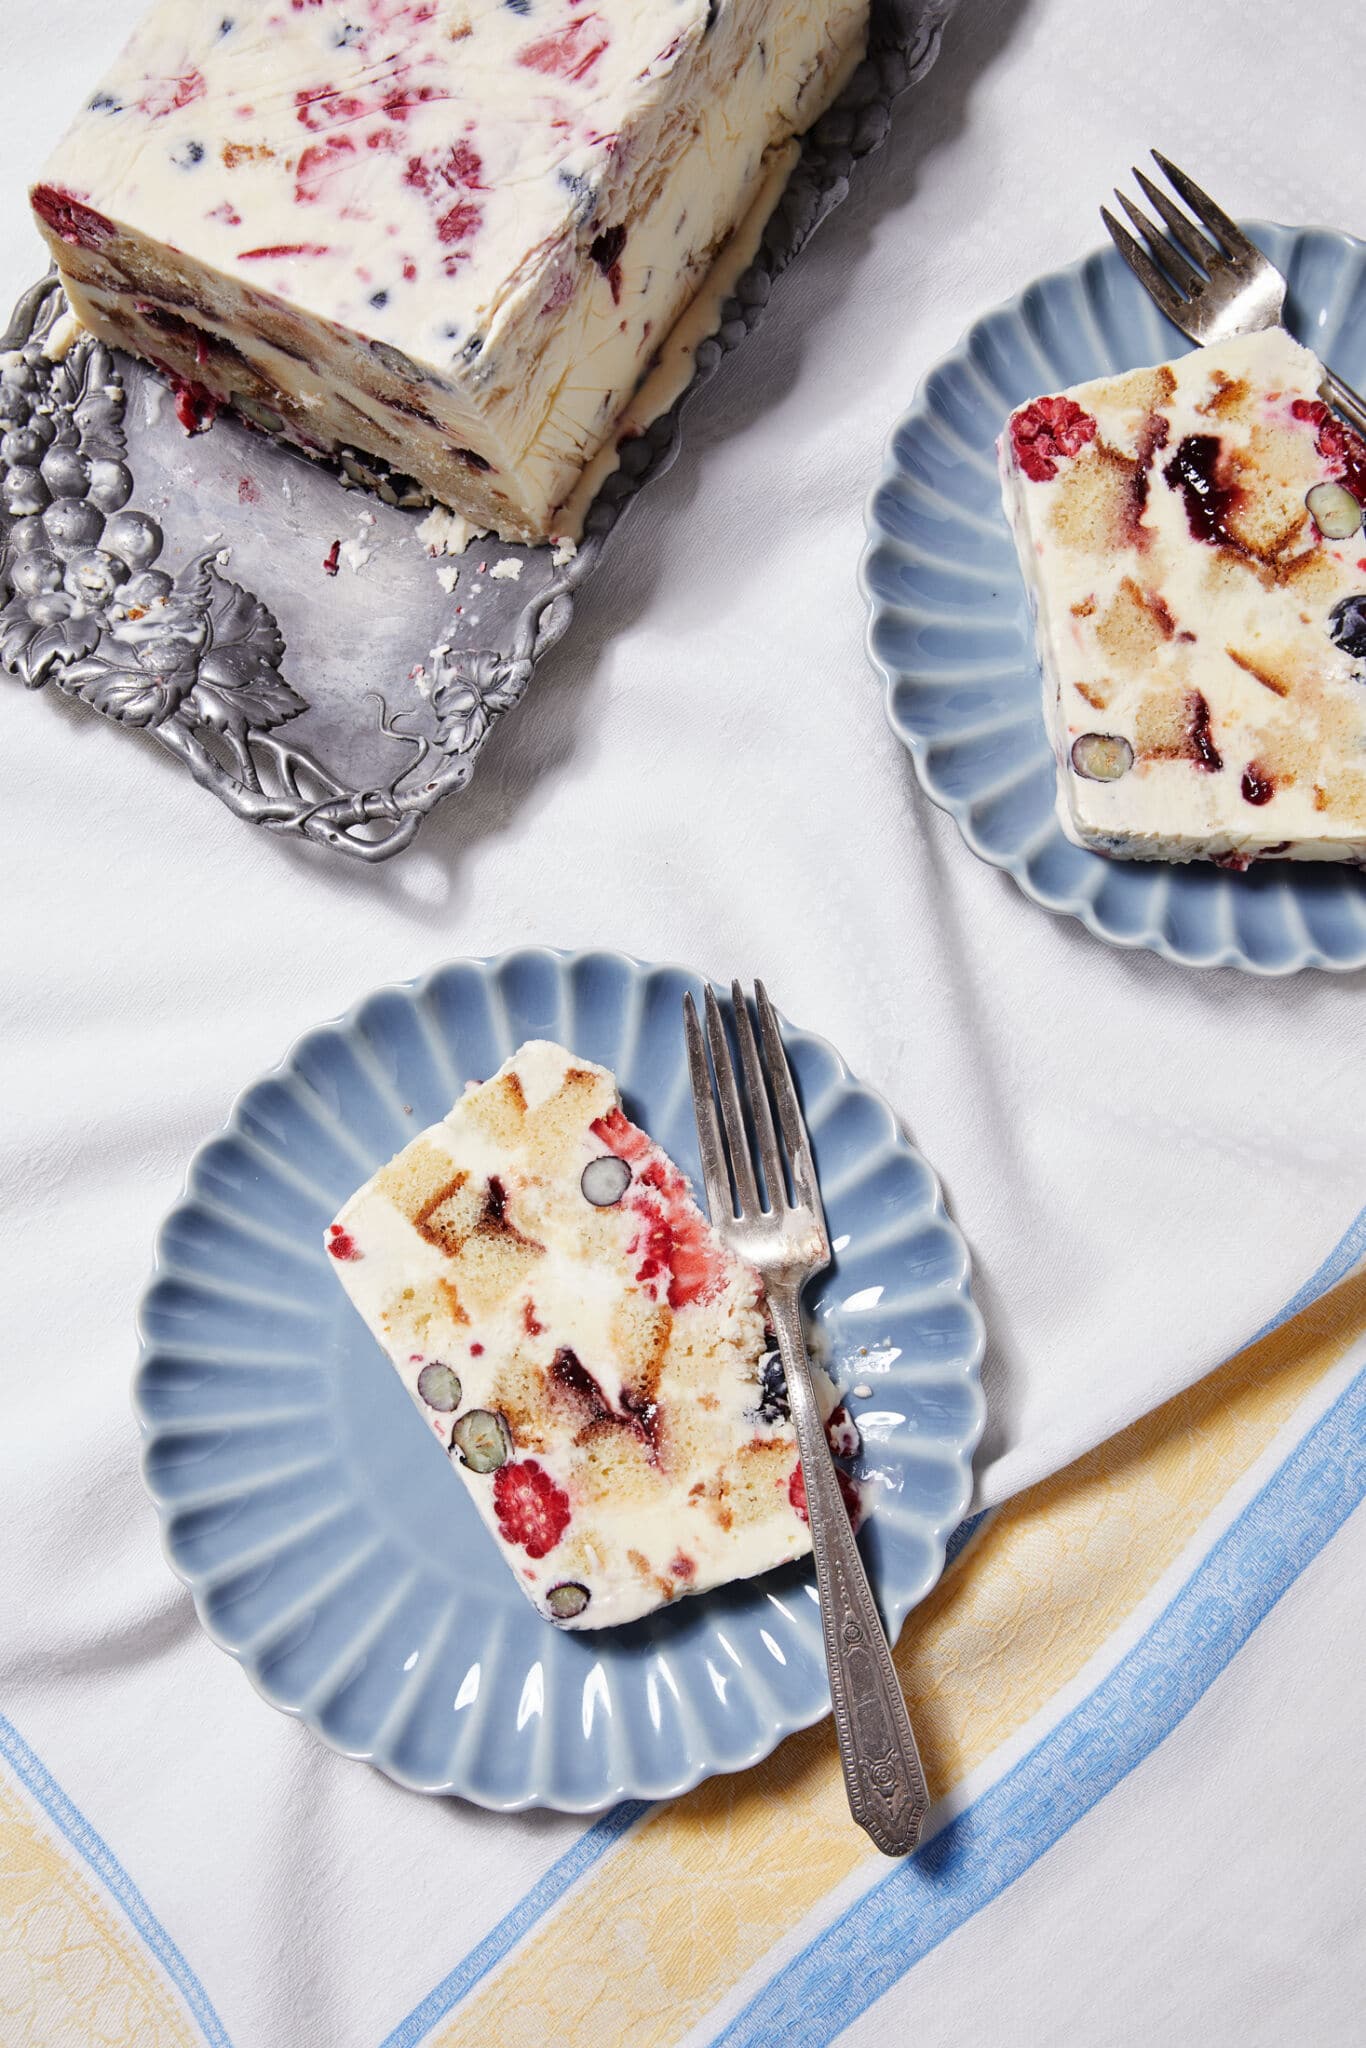 A top-view shot shows a loaf of Frozen Sherry Berry packed with ice cream, berries, raspberry jam, and sherry-soaked, cubed pound cake. Two slices are served on dessert plates.